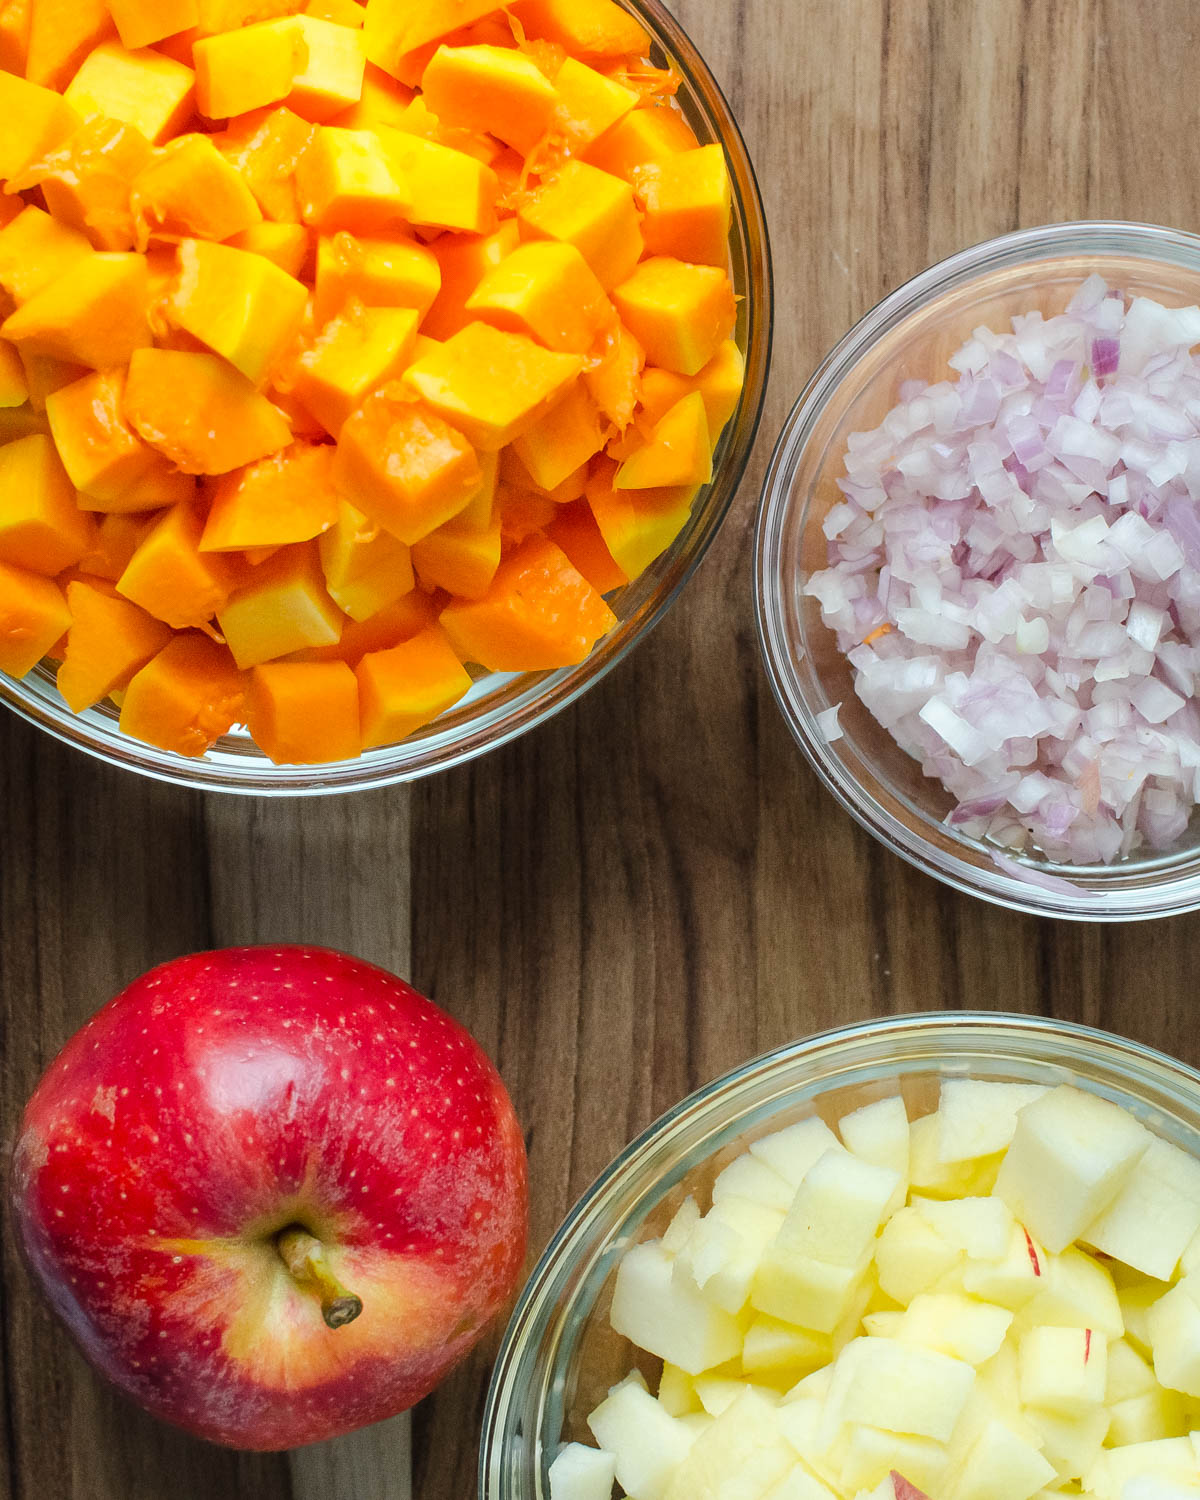 Diced shallots, apples and squash.